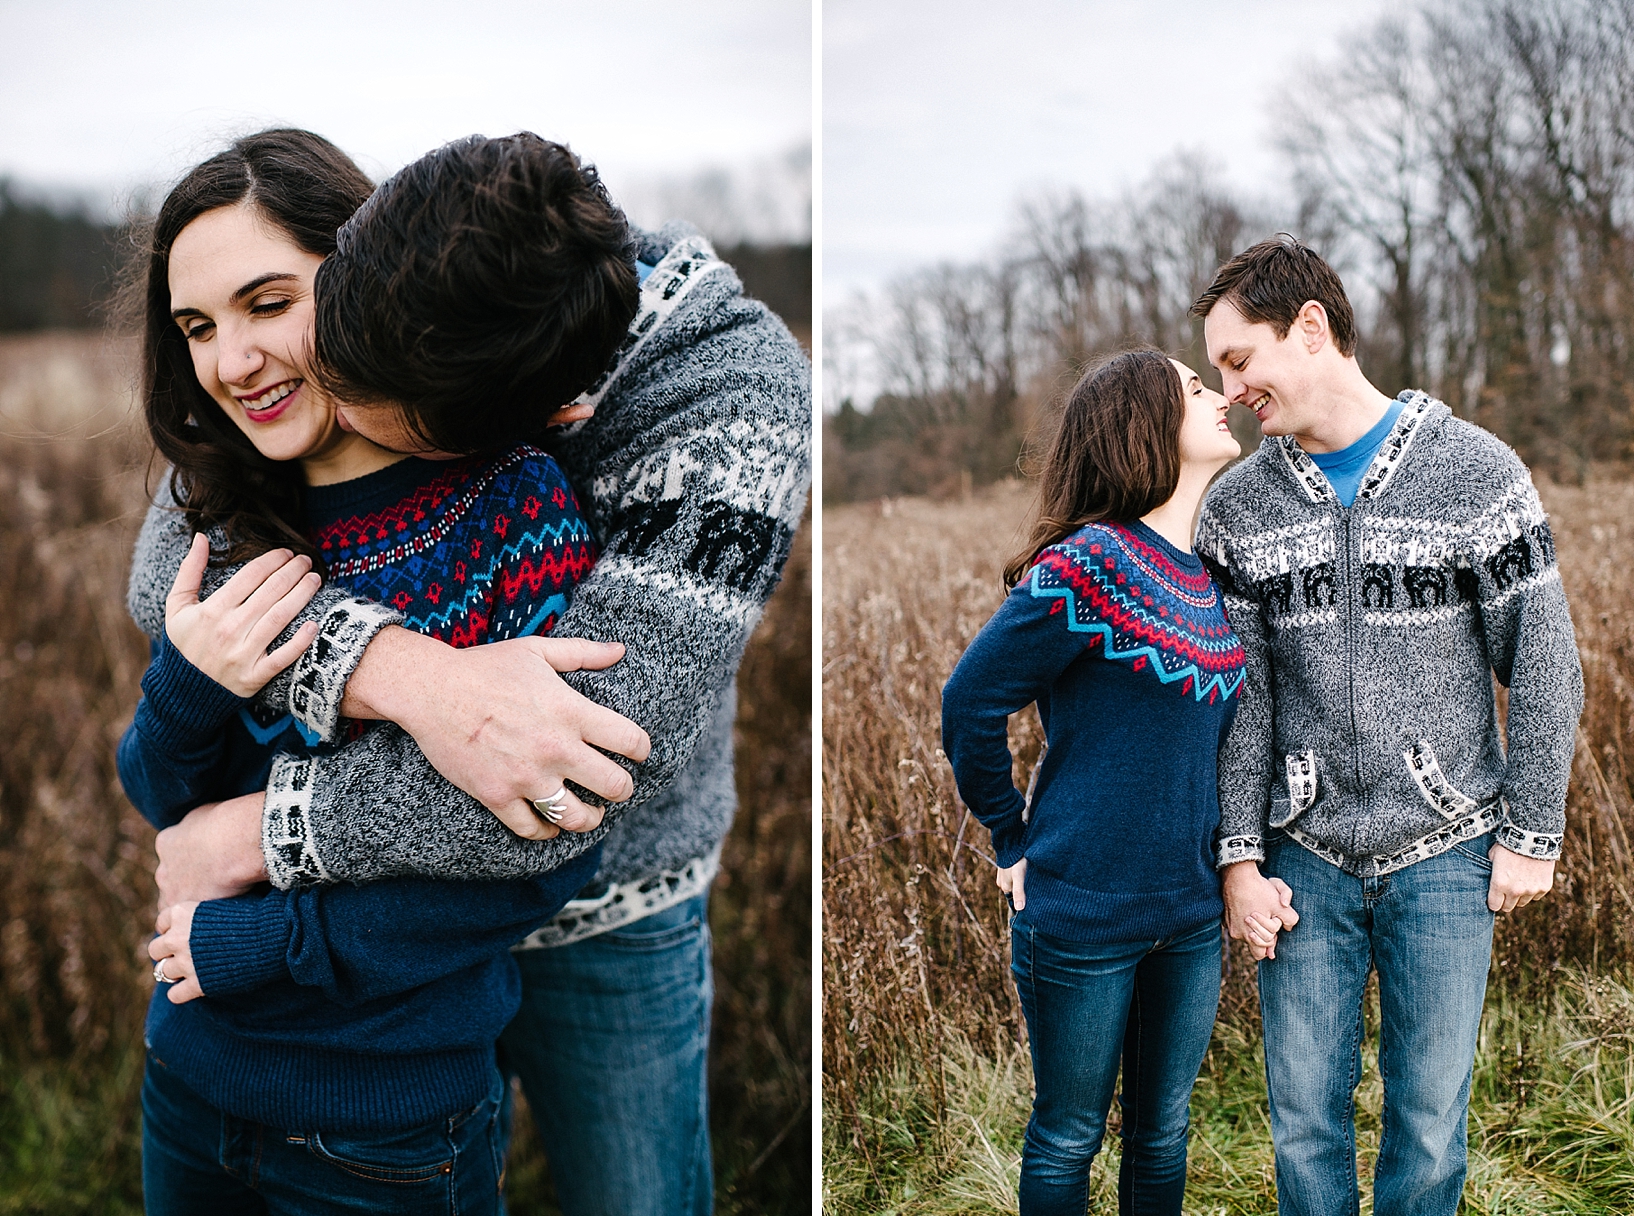 guy in grey sweater and girl in blue sweater holding hands in field